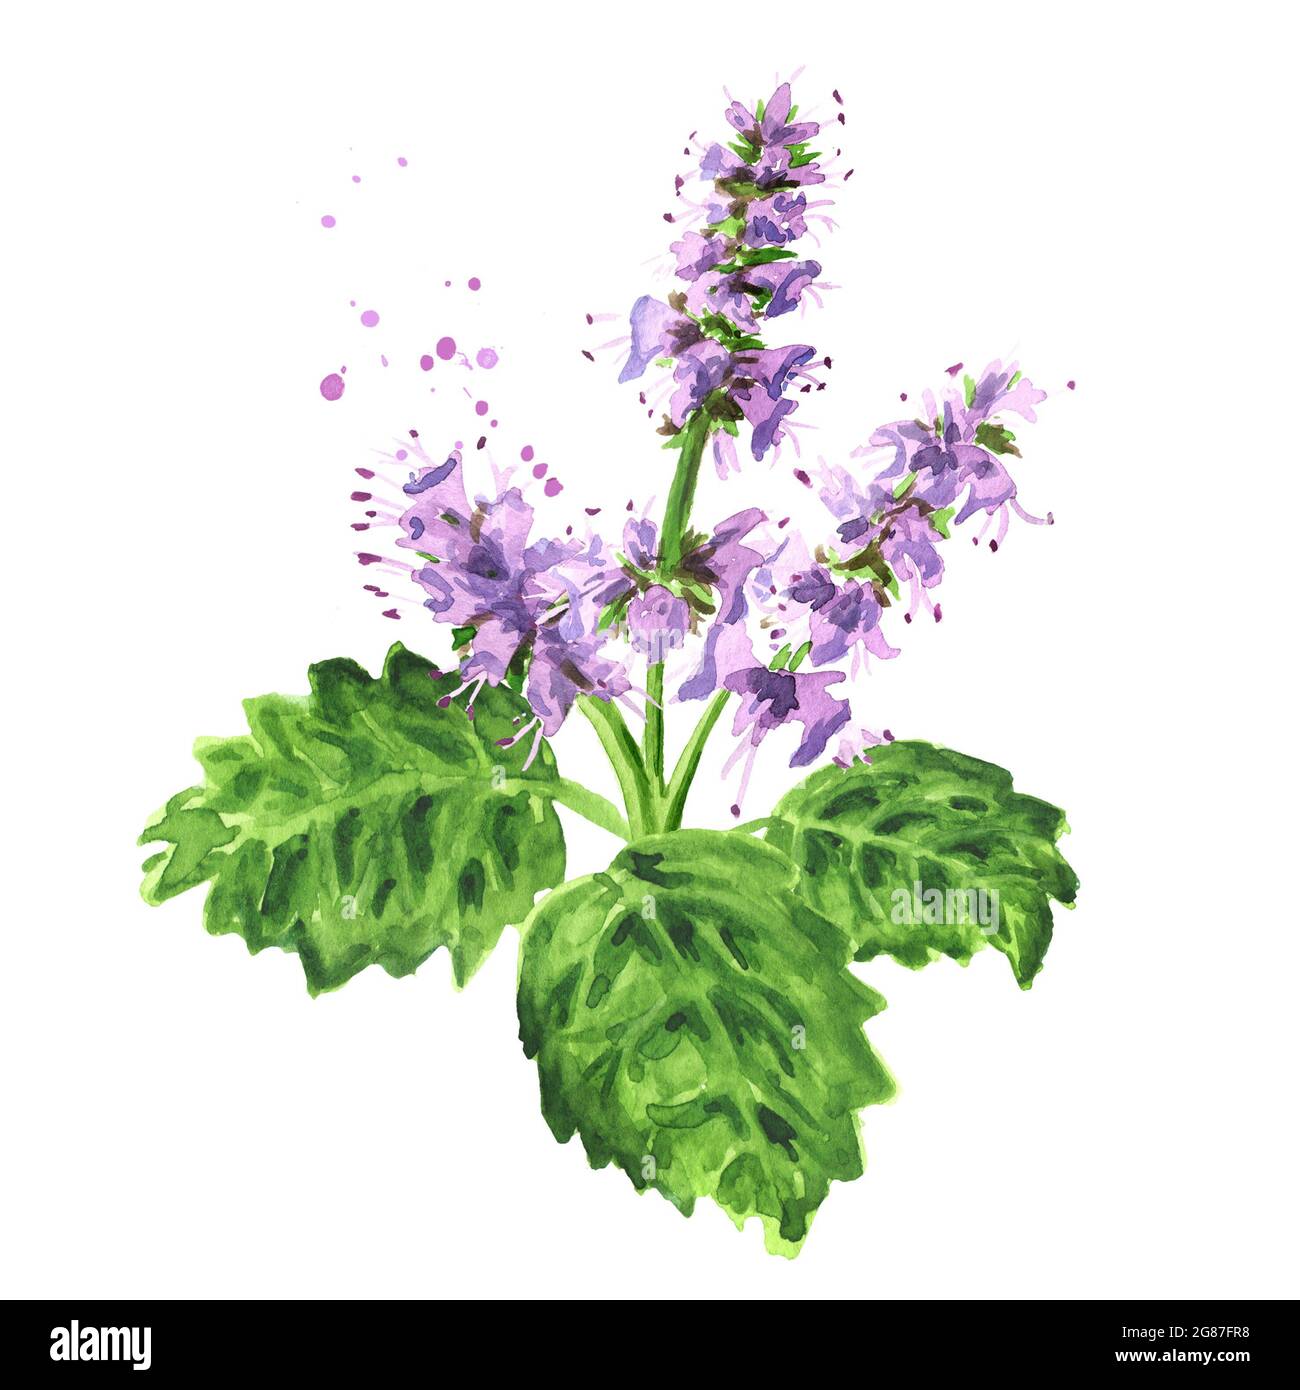 Plant patchouli or Pogostemon cablini branch with flowers and leaves, Hand drawn watercolor illustration isolated on white background Stock Photo